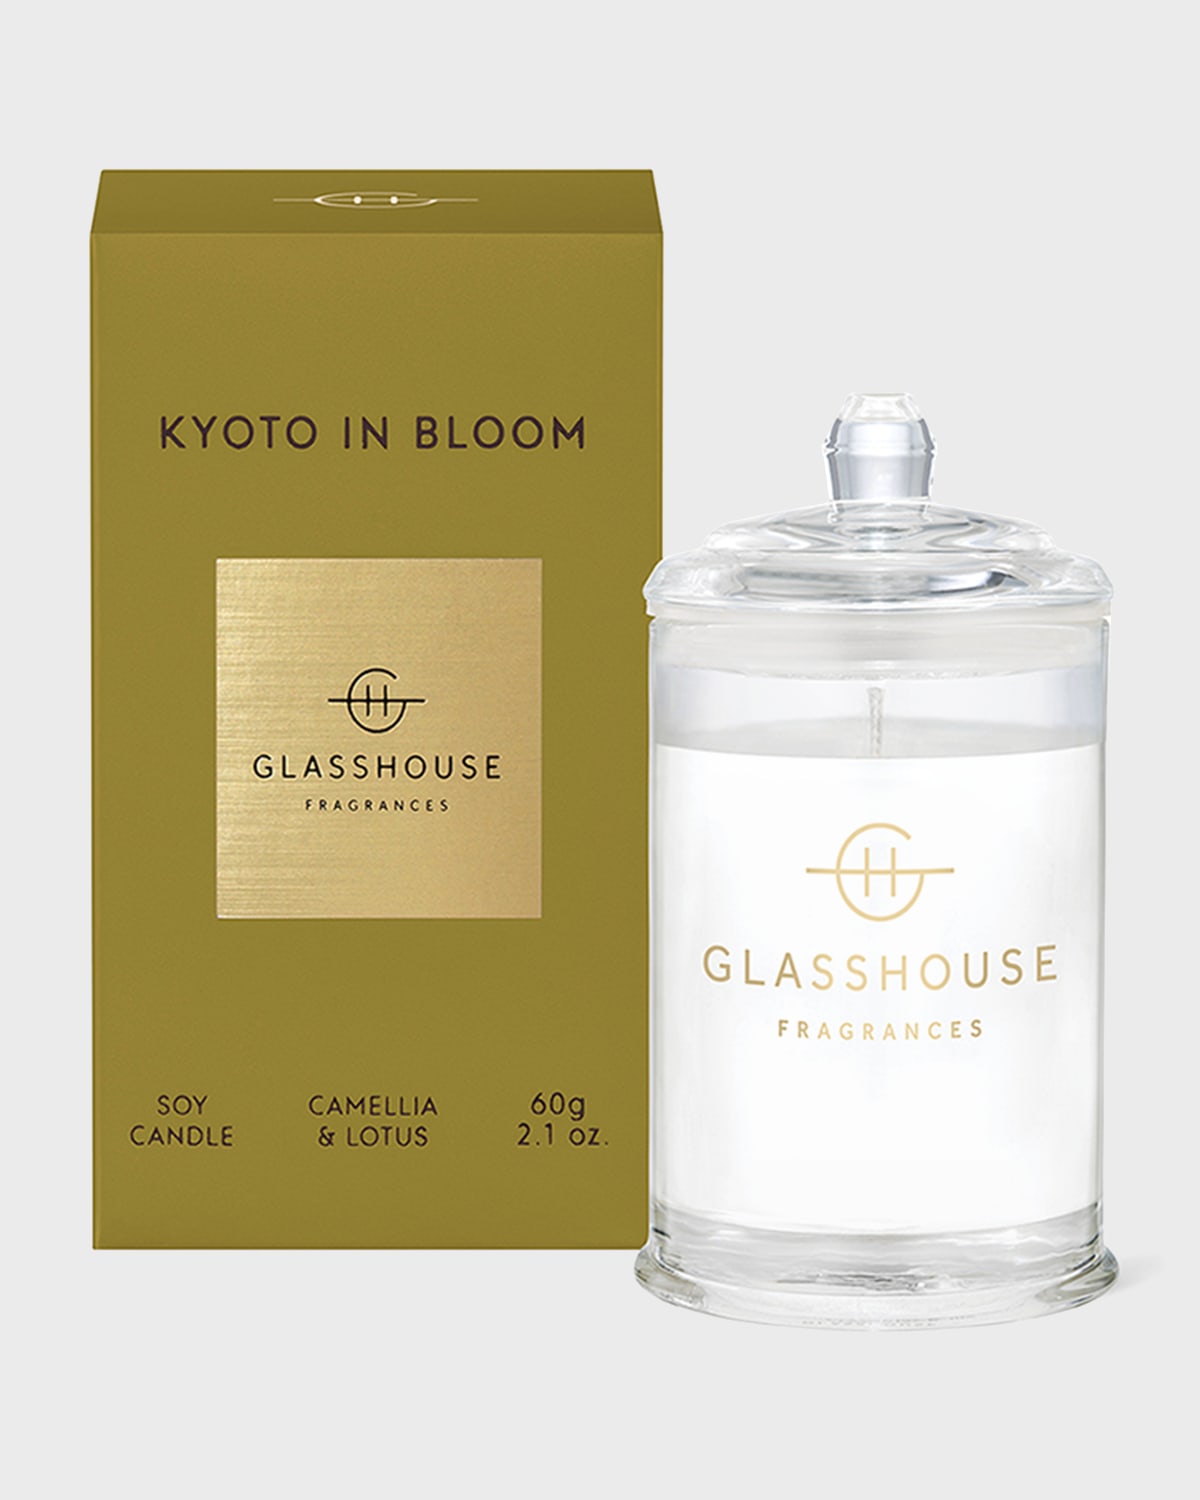 Glasshouse Fragrances Kyoto In Bloom Candle 2.1 Oz. In Gold